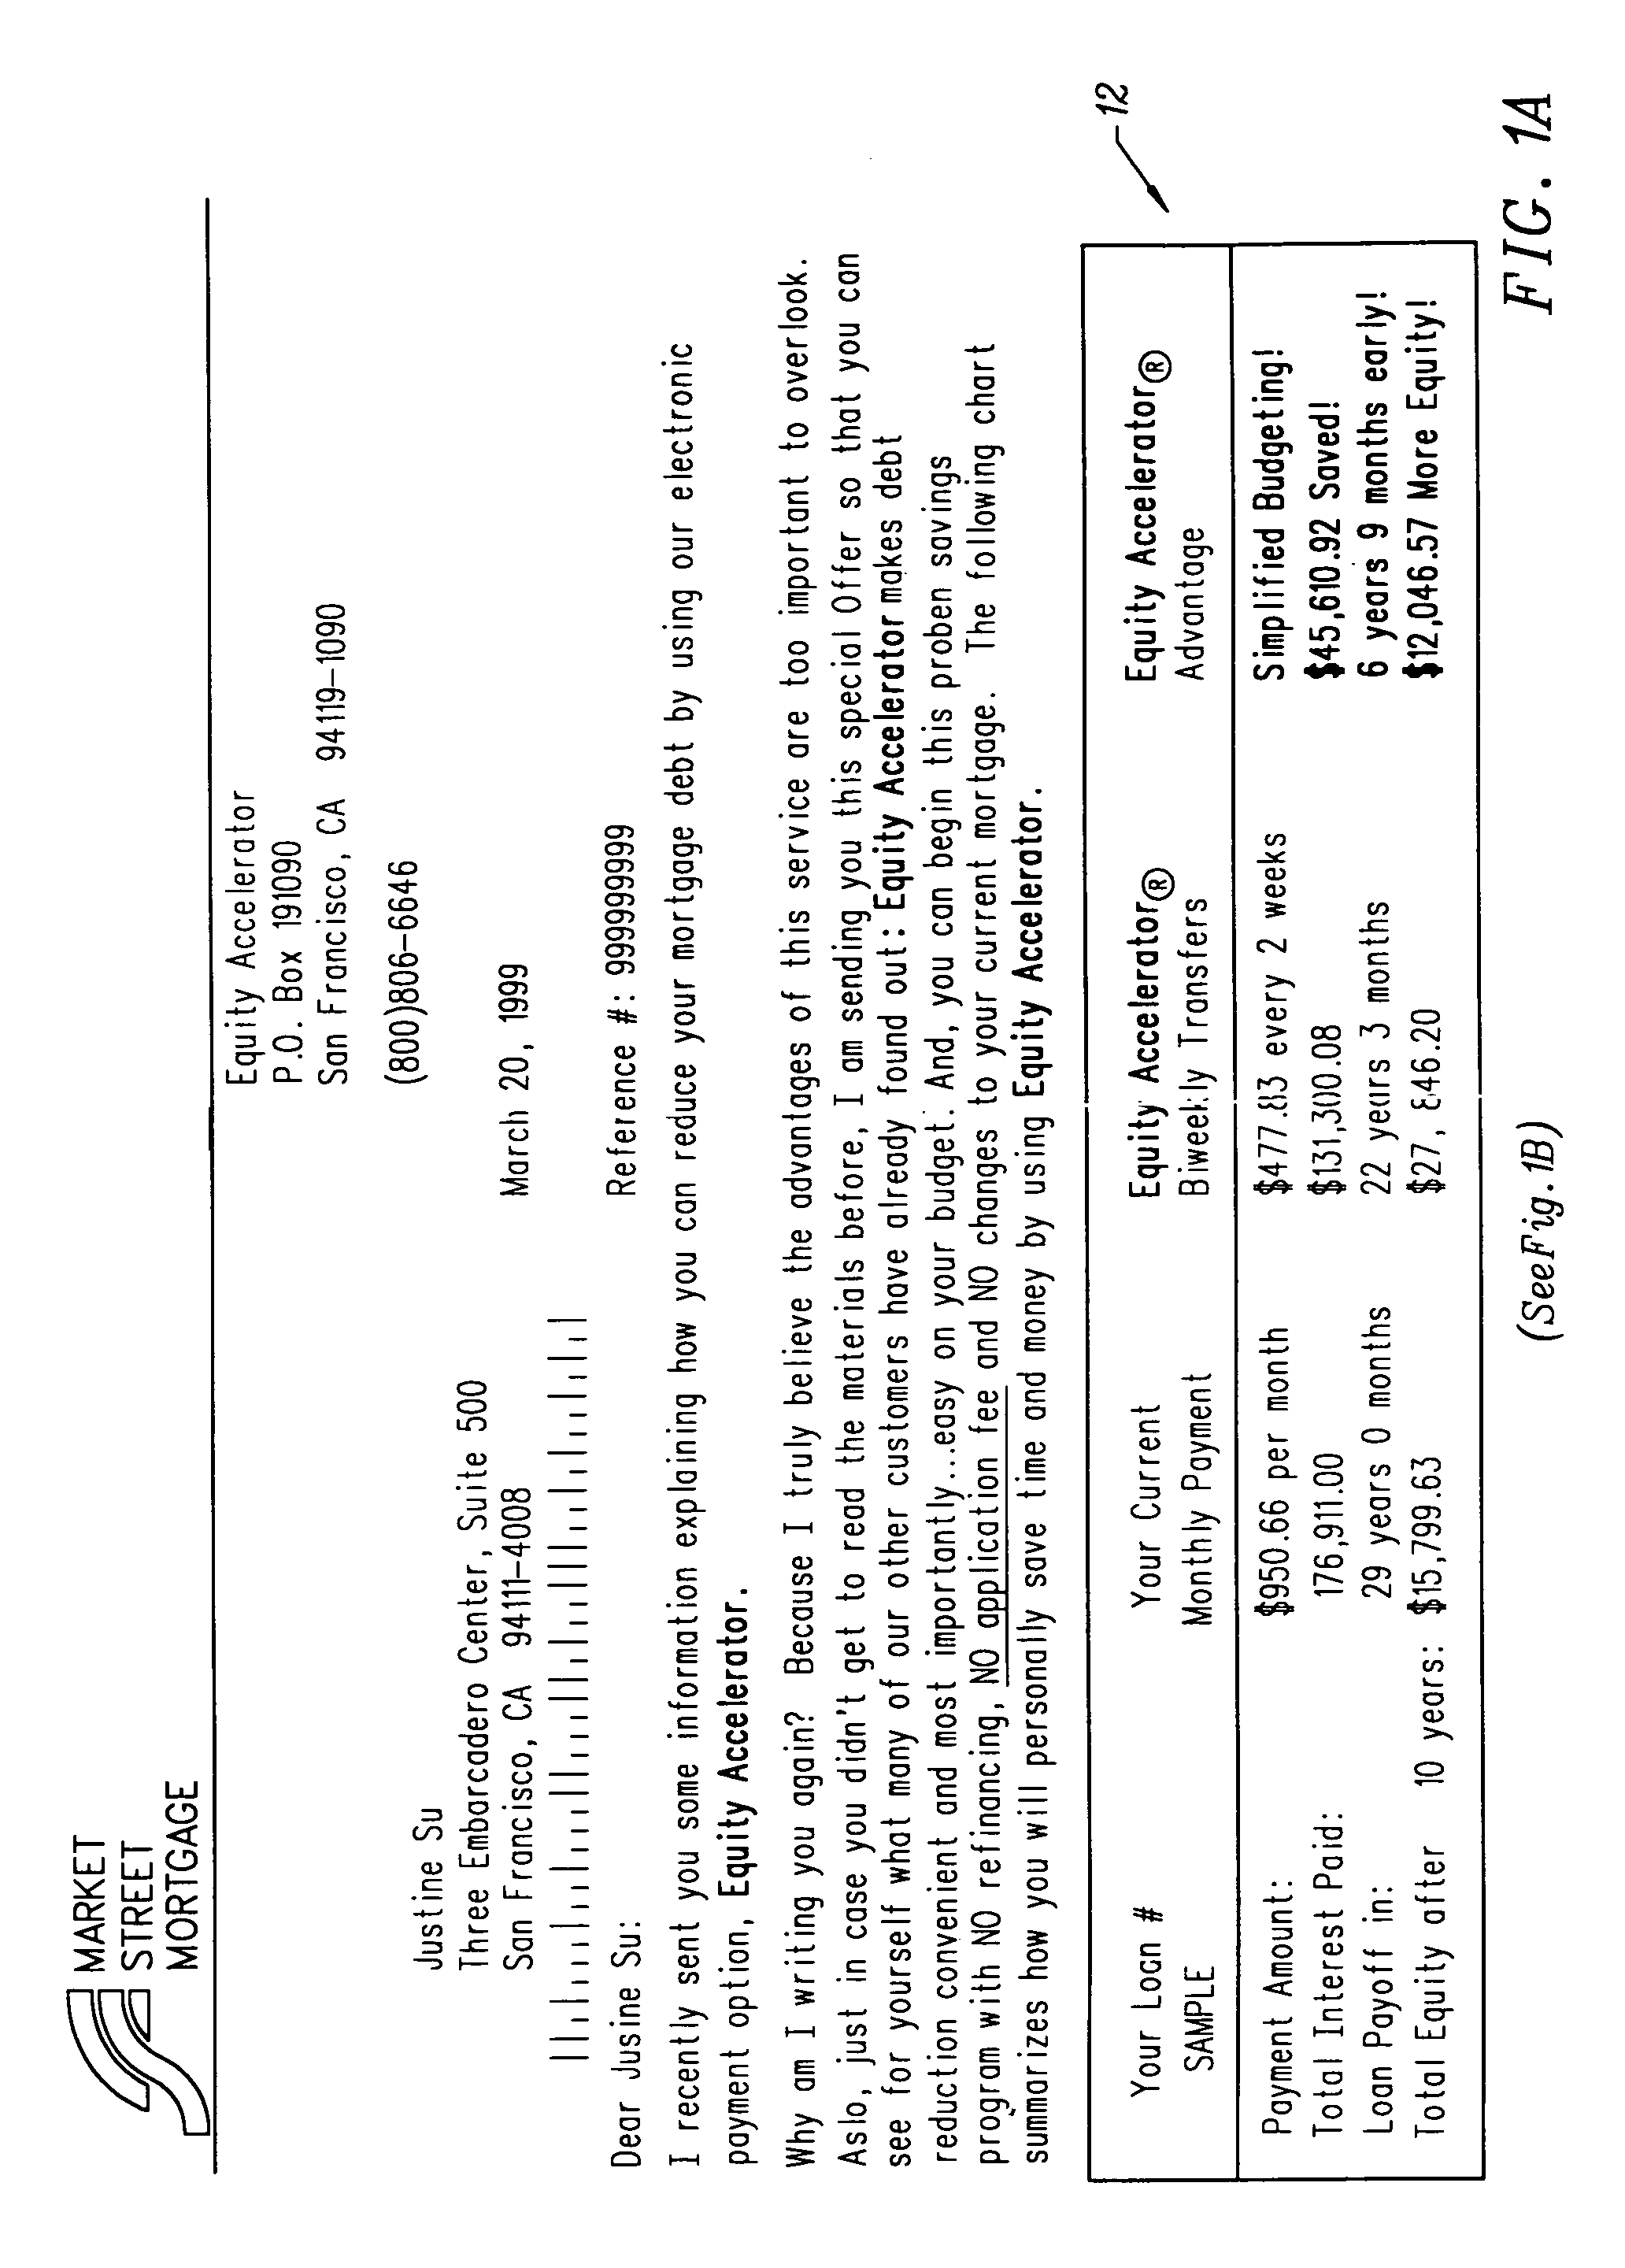 Method and apparatus for preauthorizing electronic fund transfers without actual written authentication